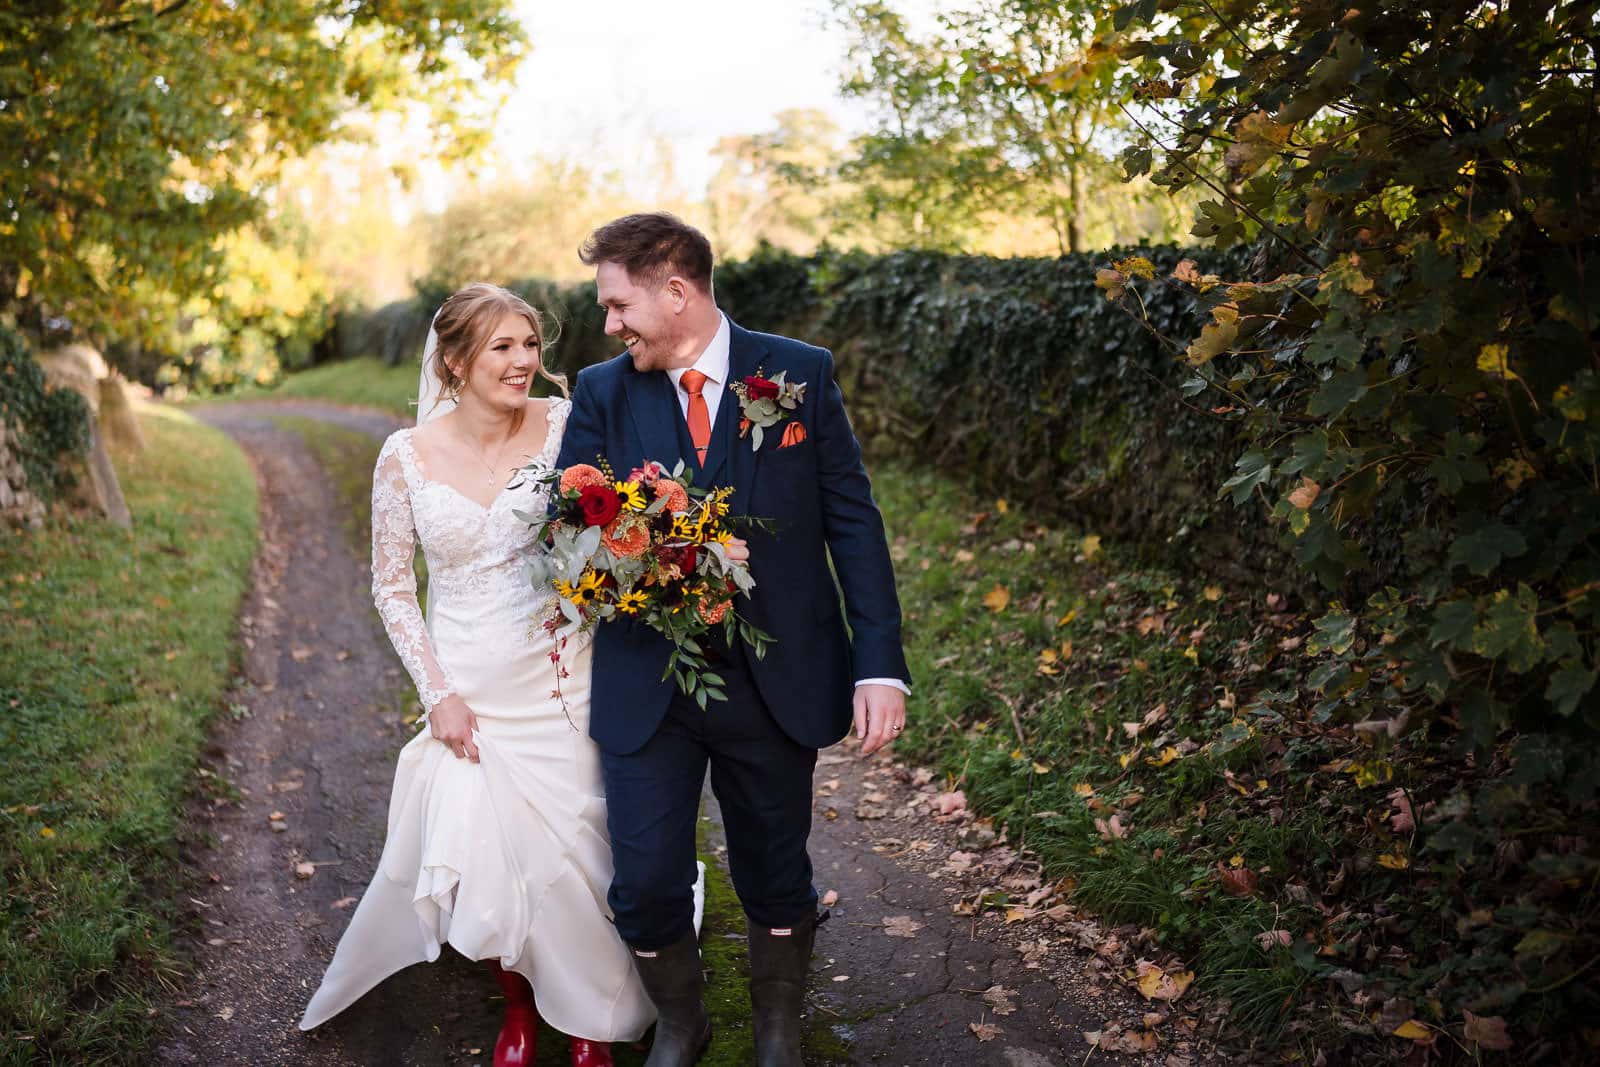 Walking in wellington boots at a wedding